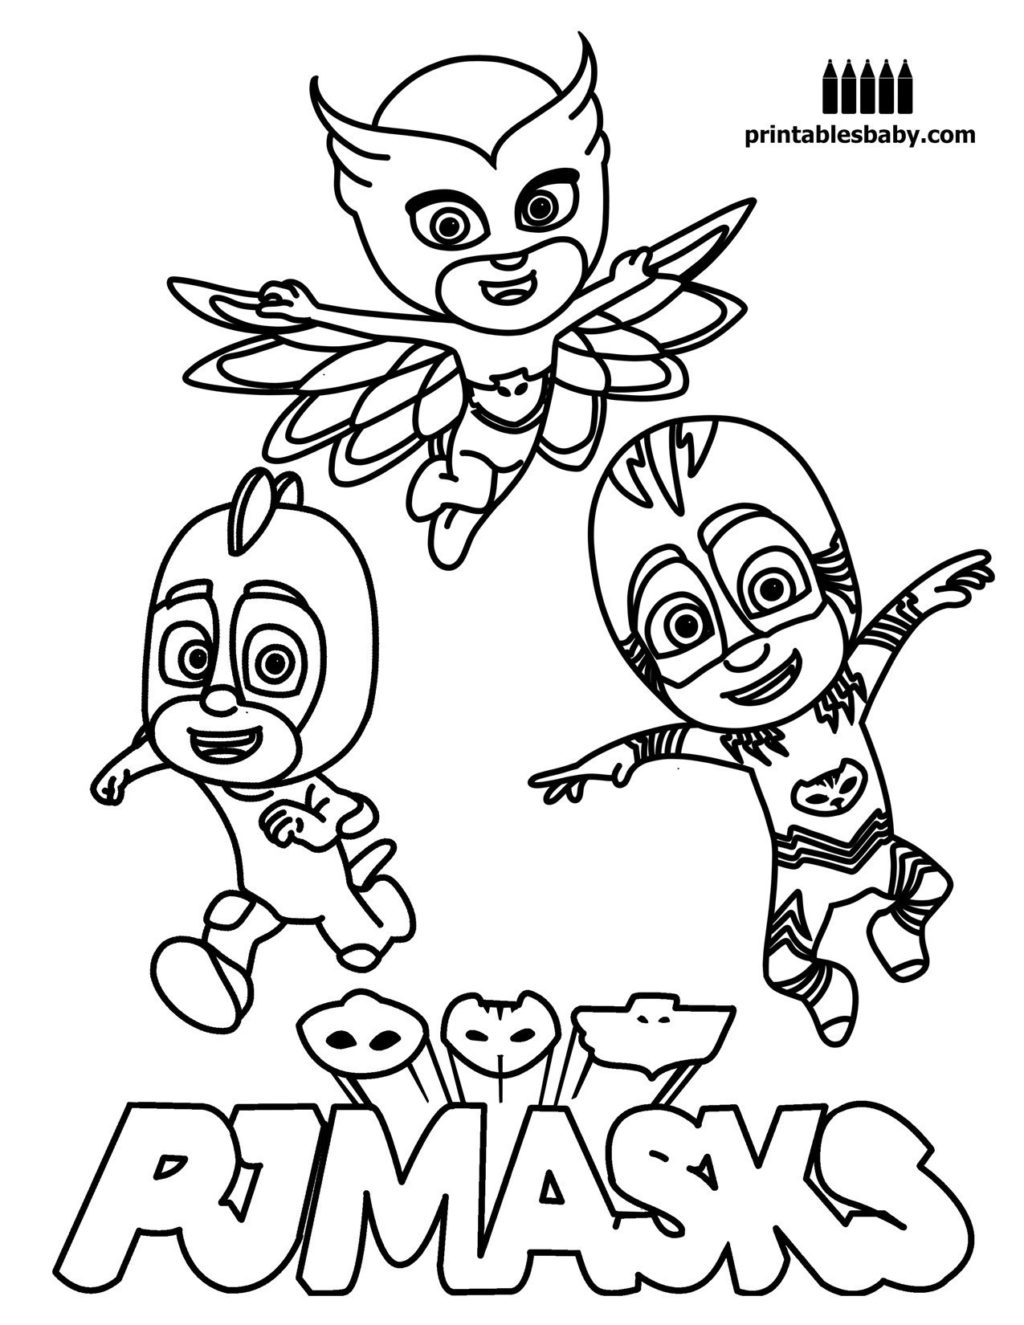 Coloring : Pj Mask Catboy Coloring Page ...